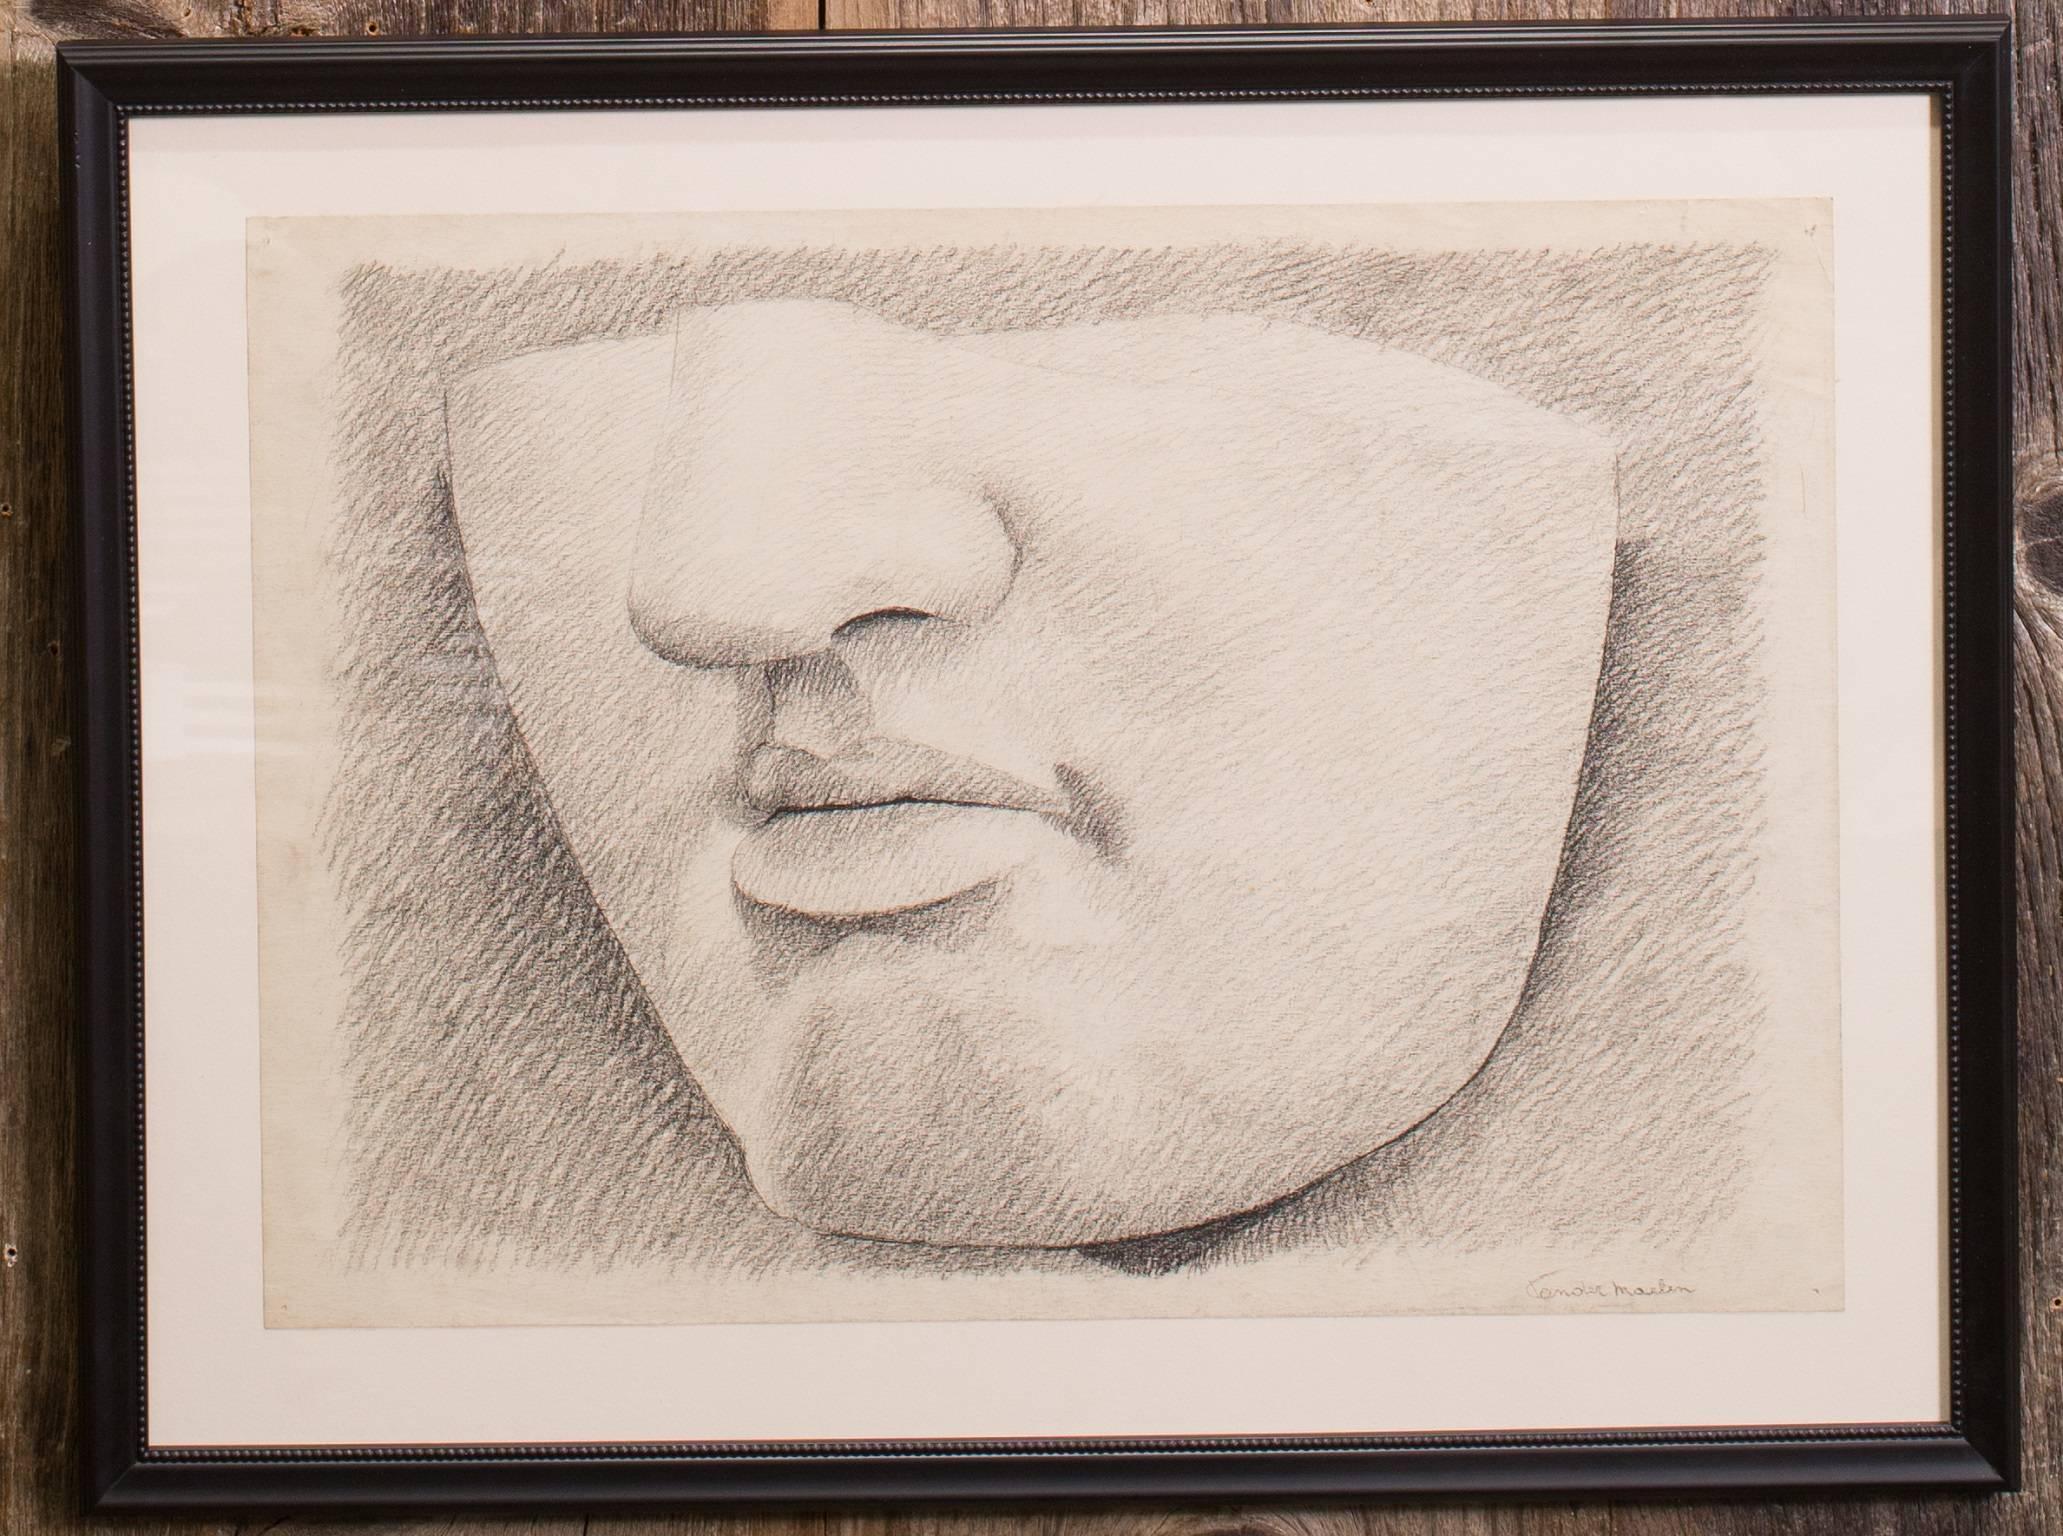 Hand-Crafted Set Three Framed Belgian Original Graphite Drawings of Classical Sculpture